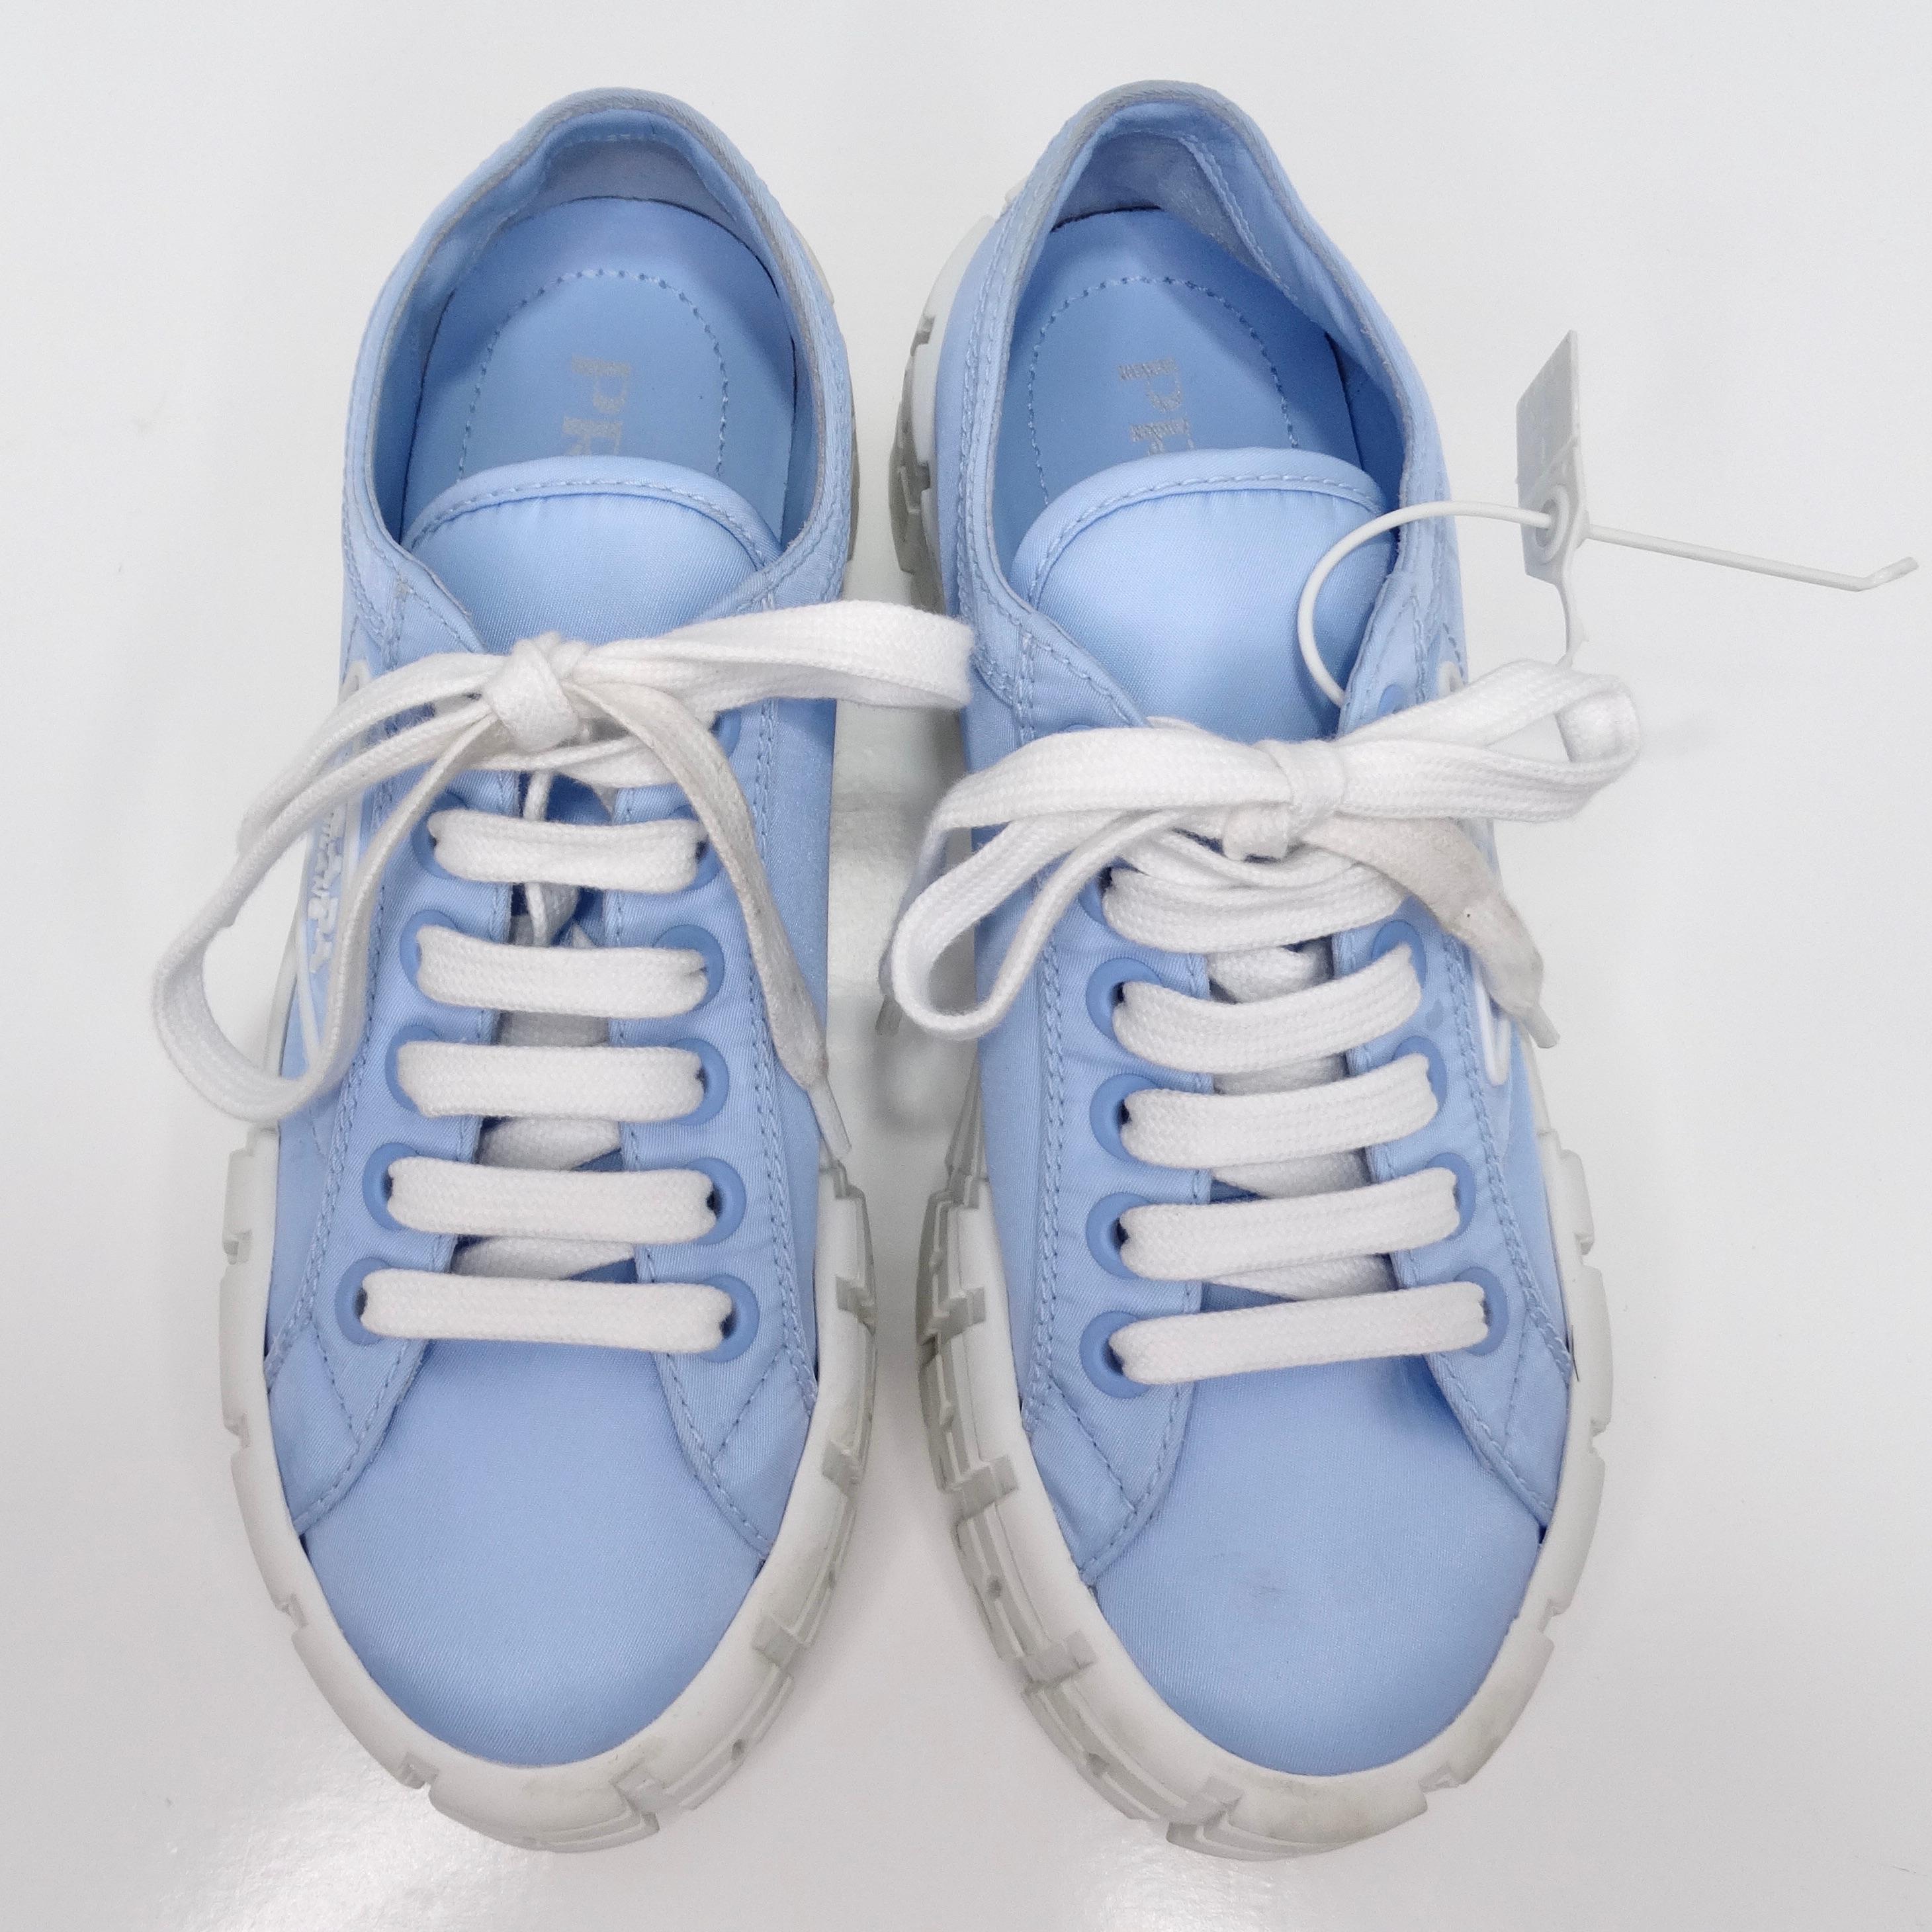 The Prada Double Wheel Re-Nylon Gabardine Sneakers in Light Blue are a stylish and statement-making addition to any footwear collection. These platform sneakers feature a chunky textured sole that not only adds height but also provides comfort and